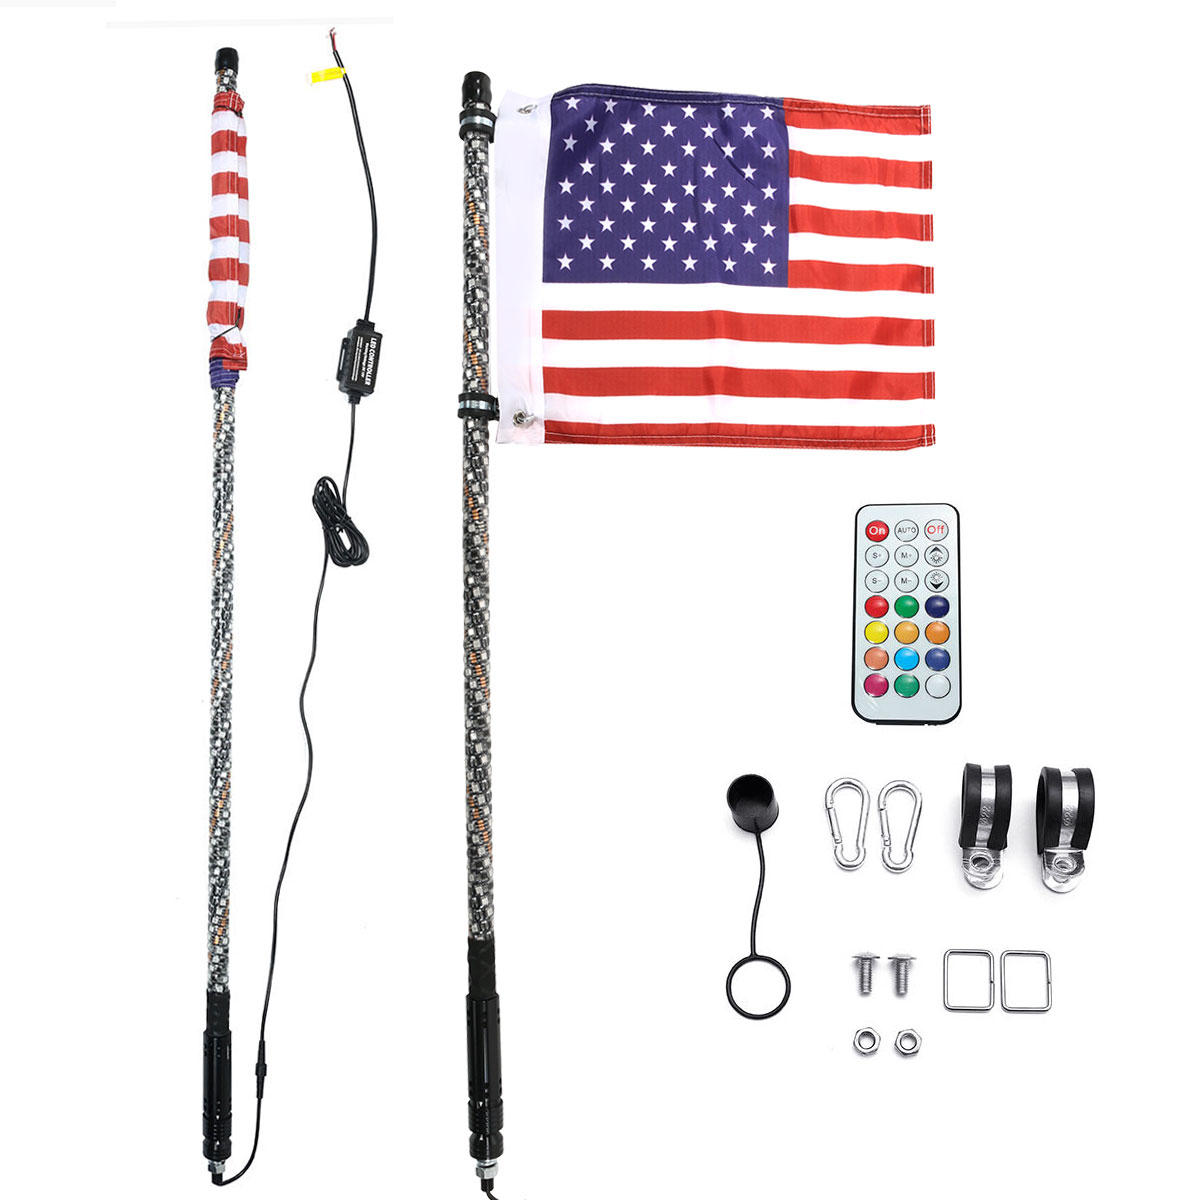 Image of 12V 3FT/4FT/5FT LED 4WD Strip RGB Color Whip America USA Flag Light With Remote Control For Jeep ATV UTV RZR Motorcycle